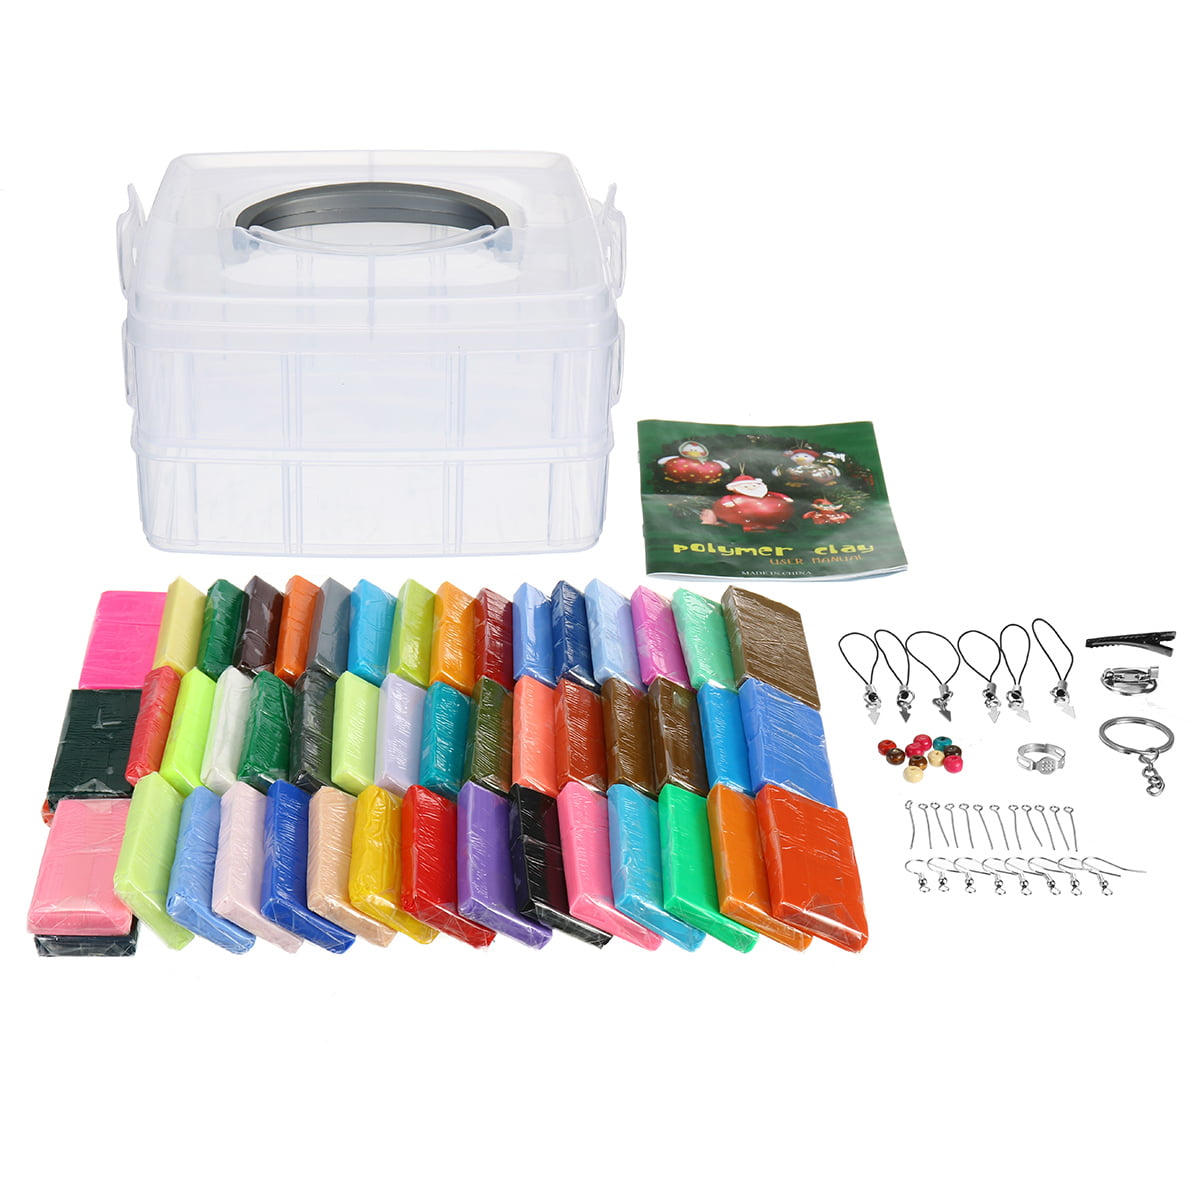 Polymer Clay Set with Box, Colorful DIY Soft Craft Oven ...